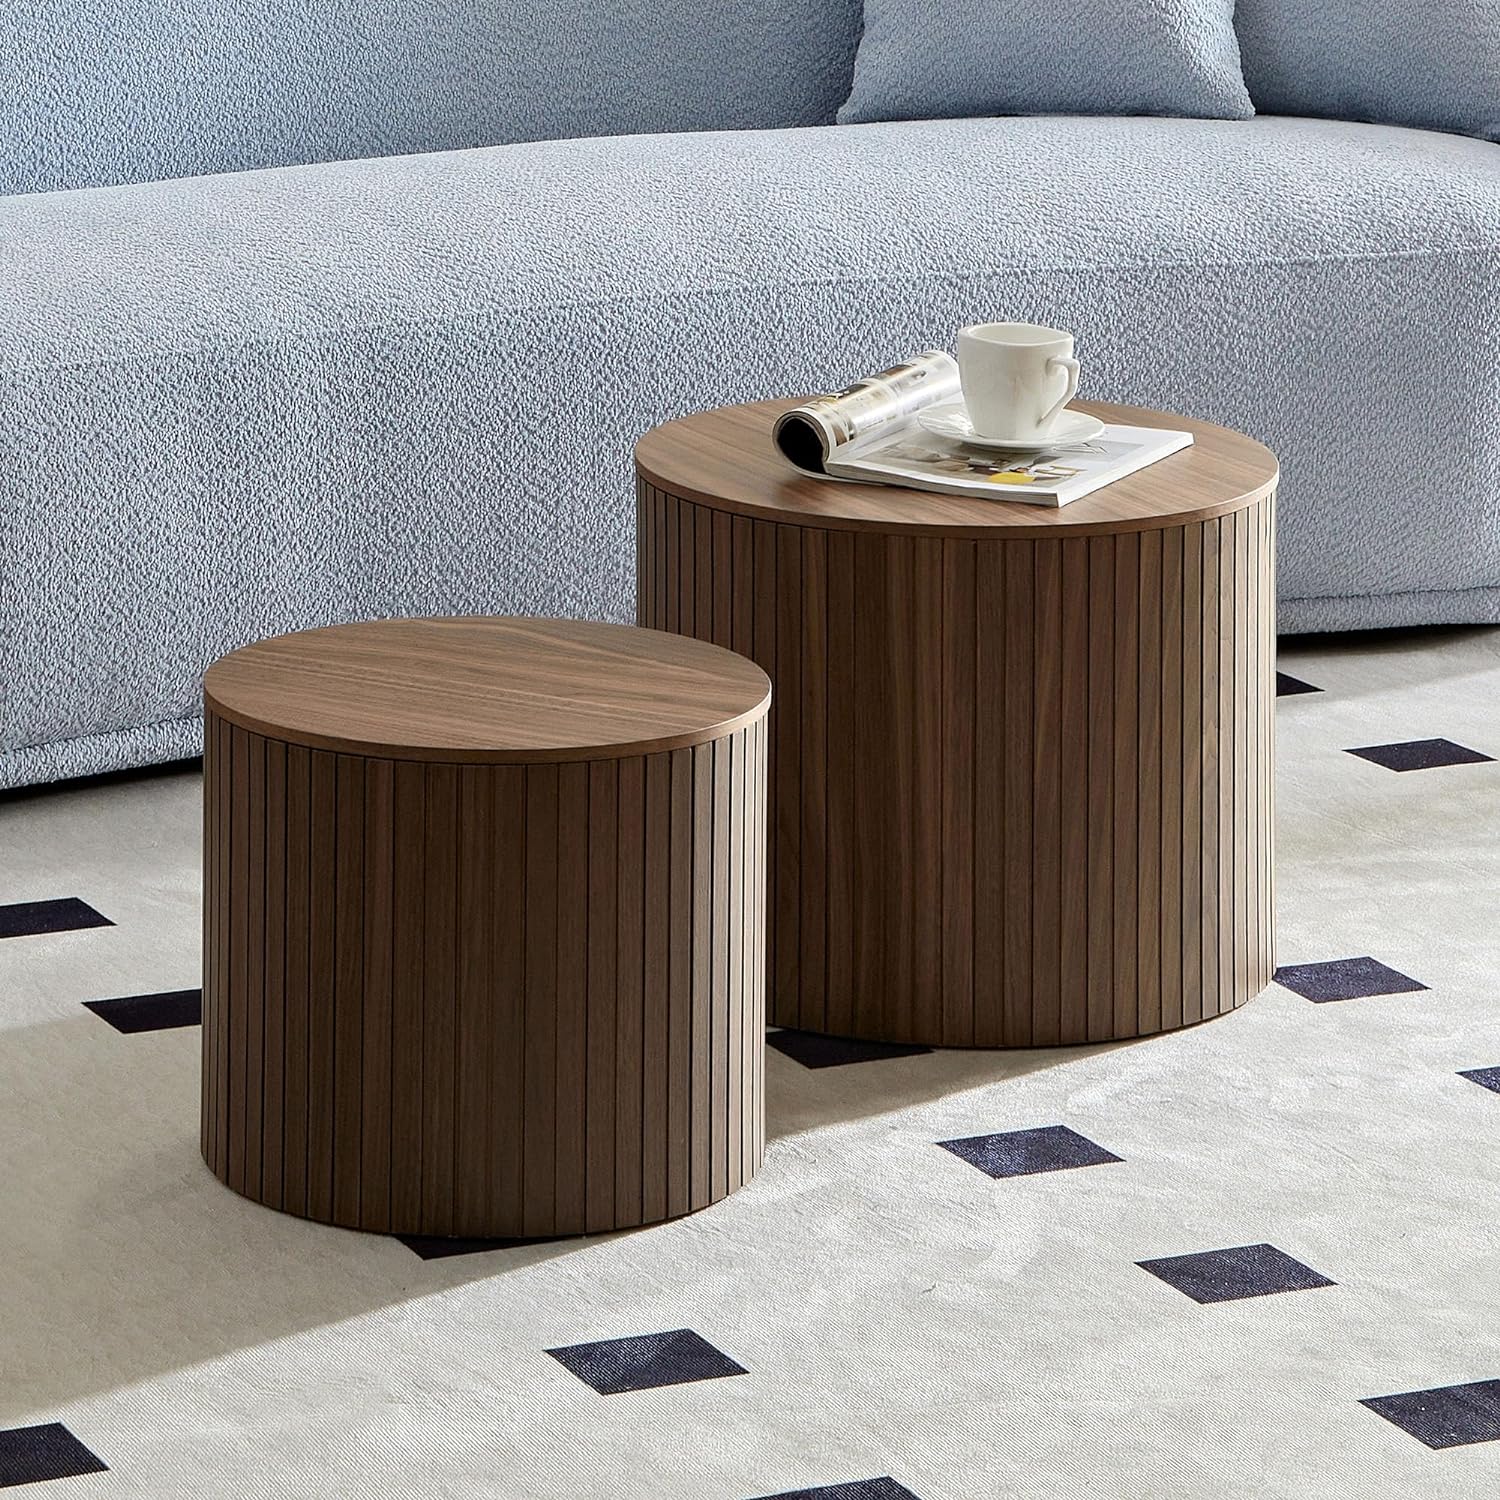 WILLIAMSPACE 19.17 Nesting Coffee Table Set of 2, Walnut Round Wooden Modern Circle Center Table with Storage for Living Room, Accent End Side Table for Small Space (Walnut)